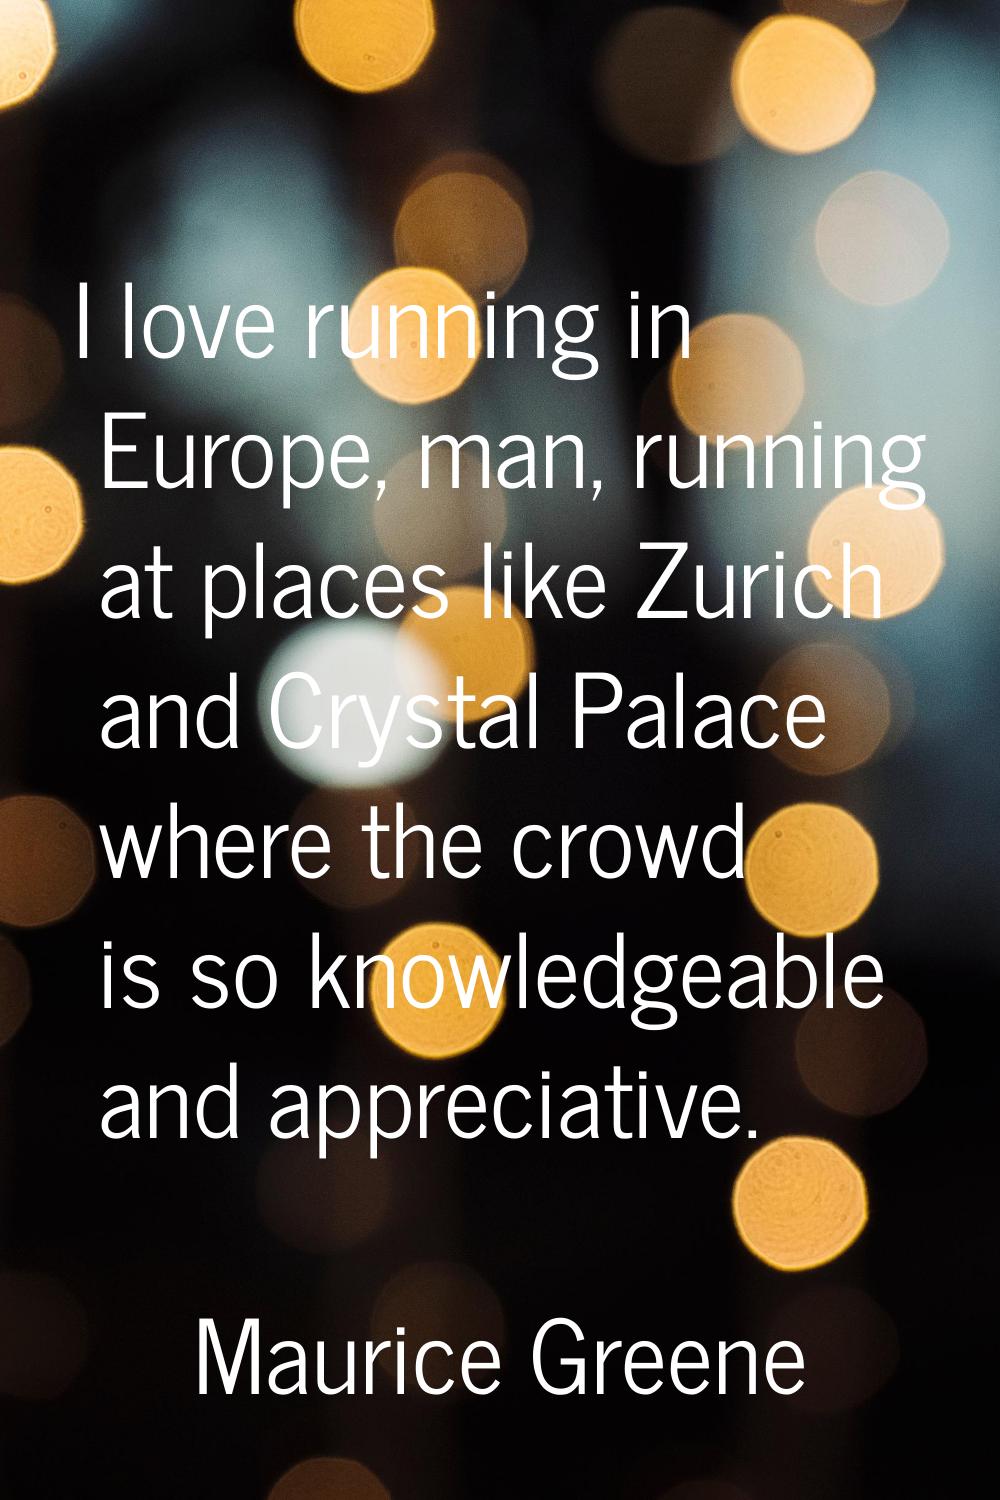 I love running in Europe, man, running at places like Zurich and Crystal Palace where the crowd is 